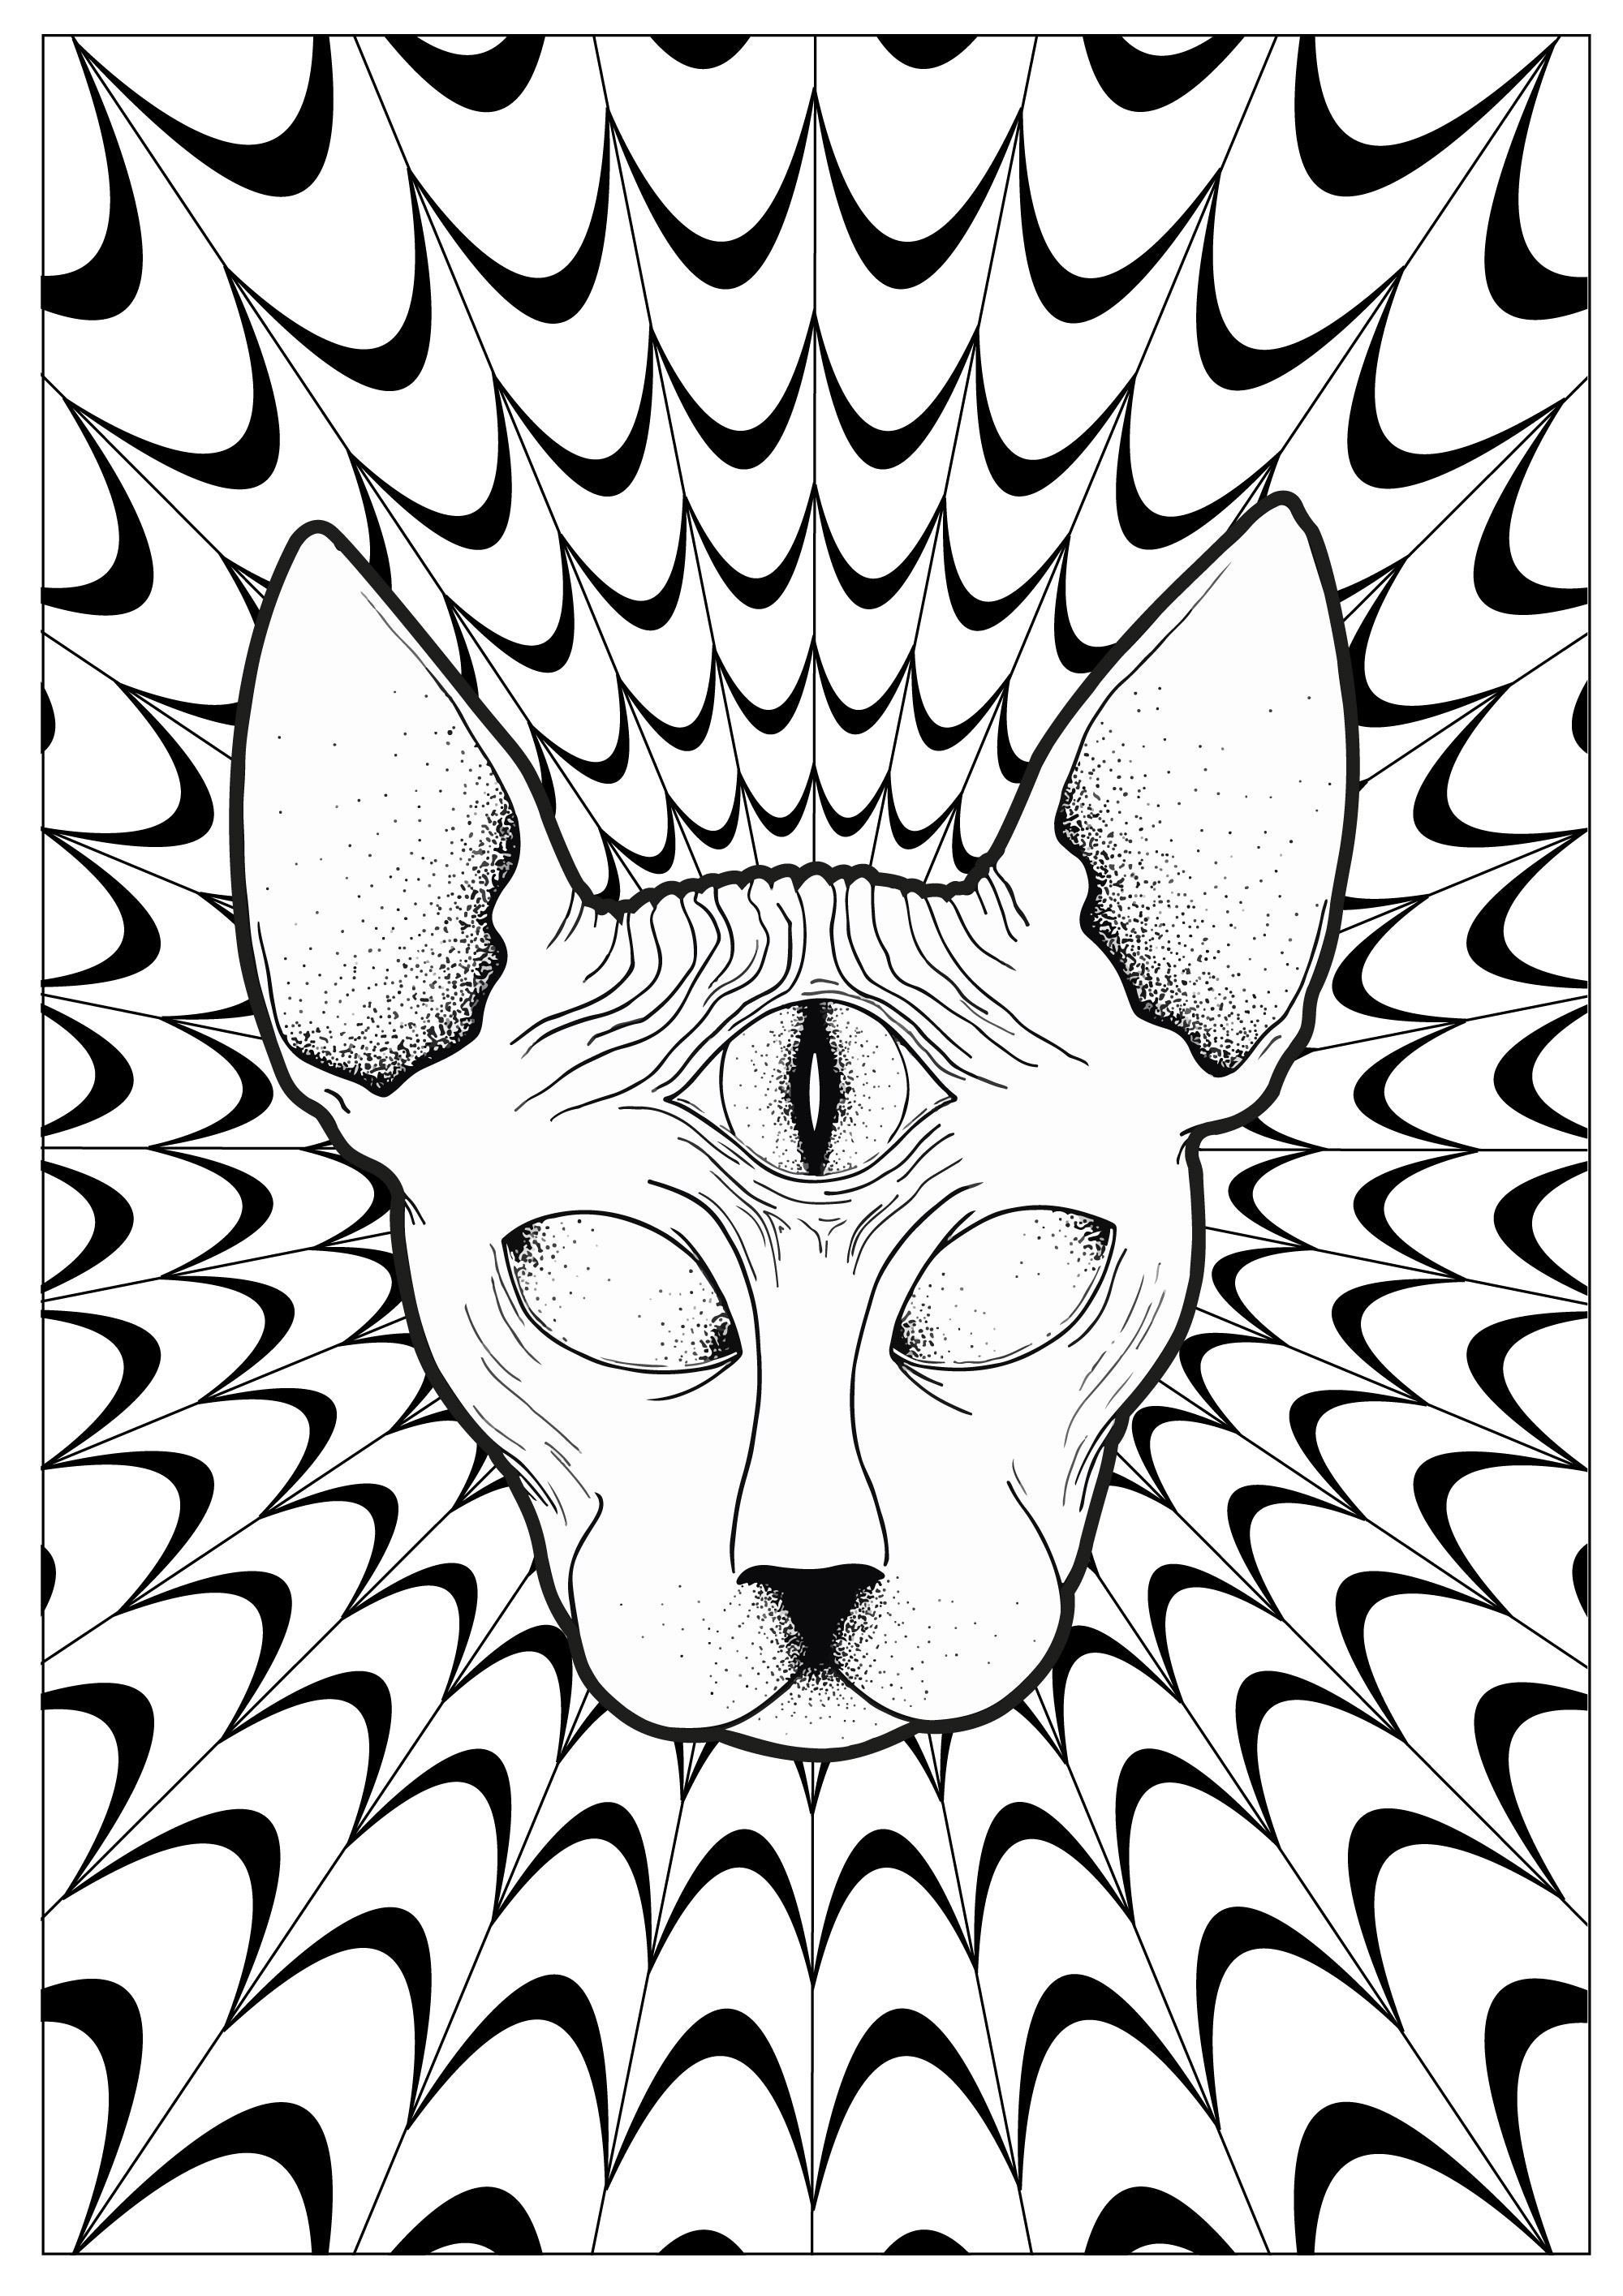 Download Cat psychedelic sphynx - Psychedelic Adult Coloring Pages